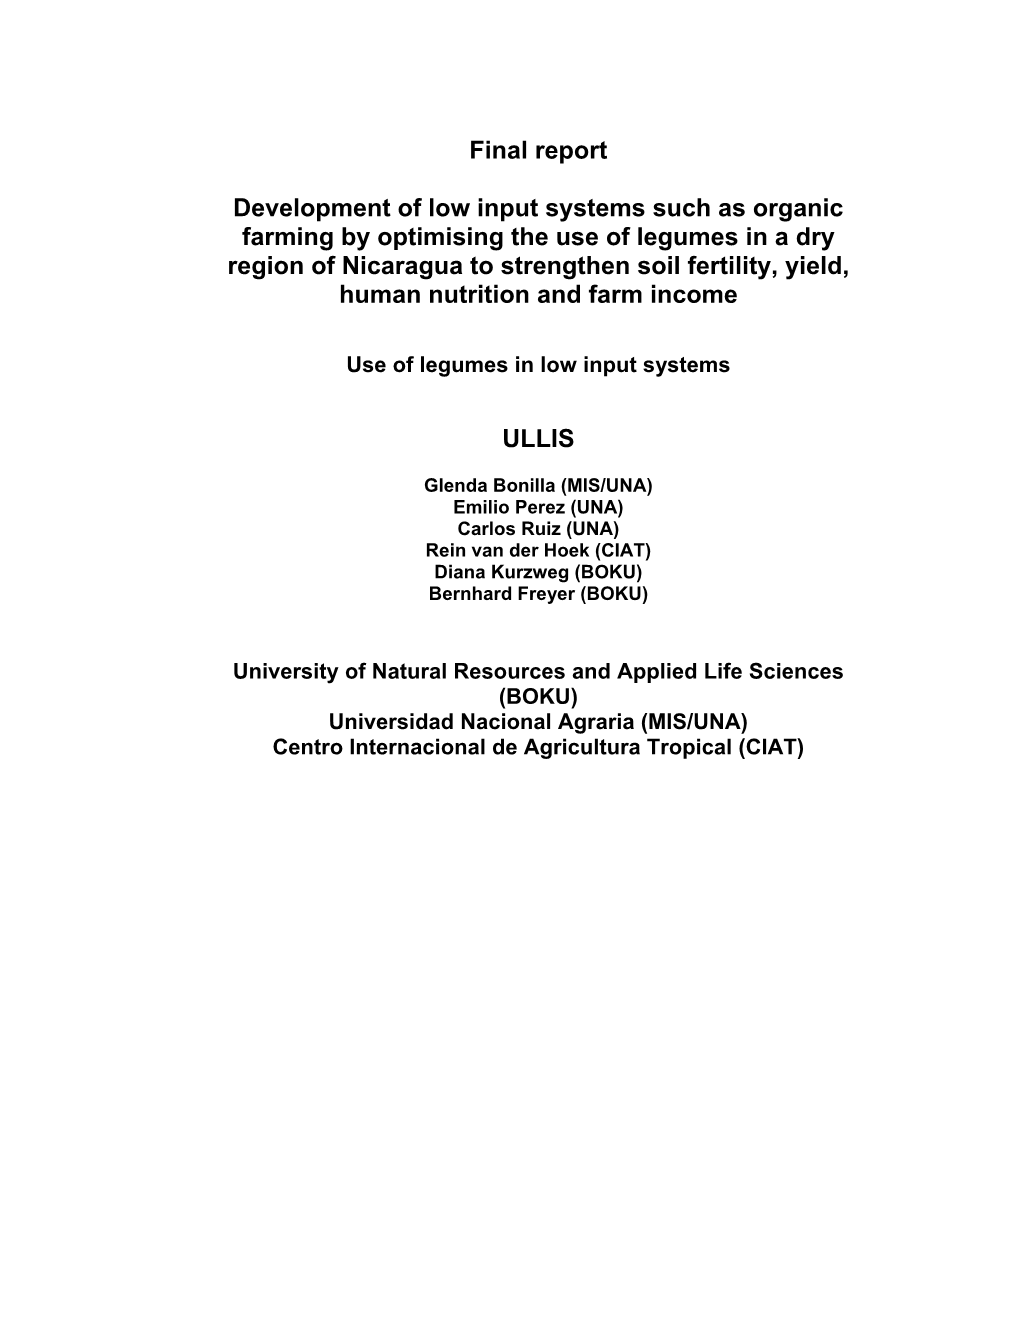 Final Report Development of Low Input Systems Such As Organic Farming By